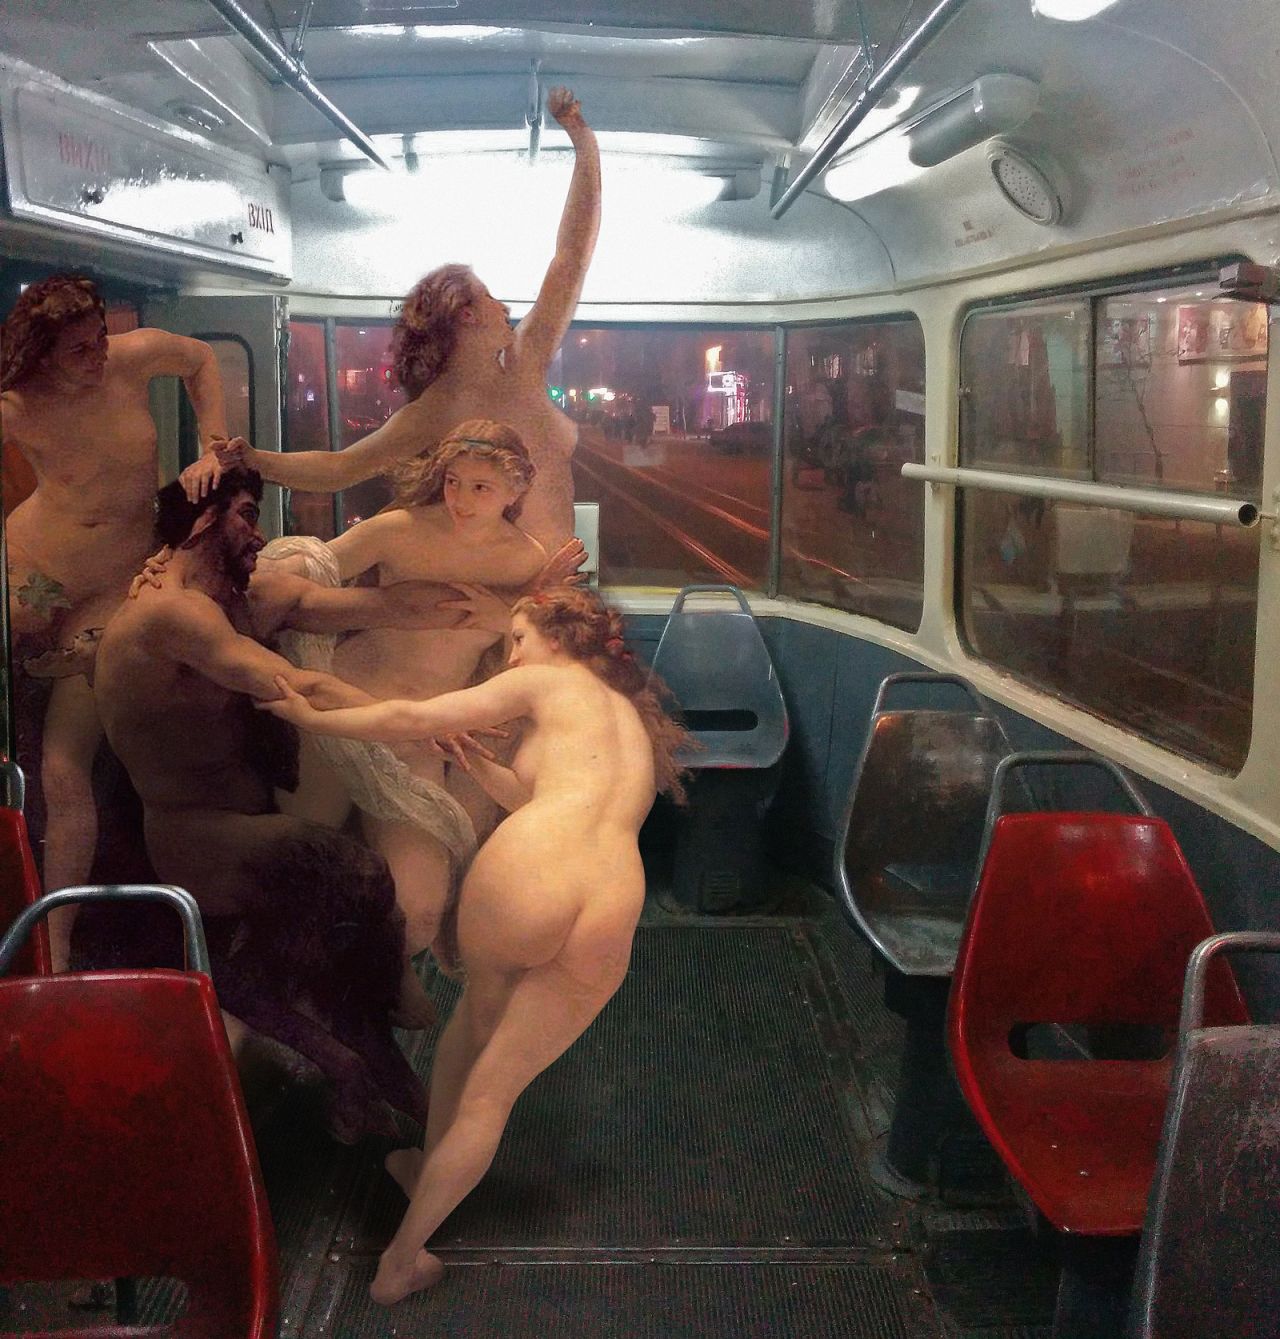 Another Bouguereau, this time "Nymphs and Satyr" (1873), displaying a riotous scene at the back of a tram.